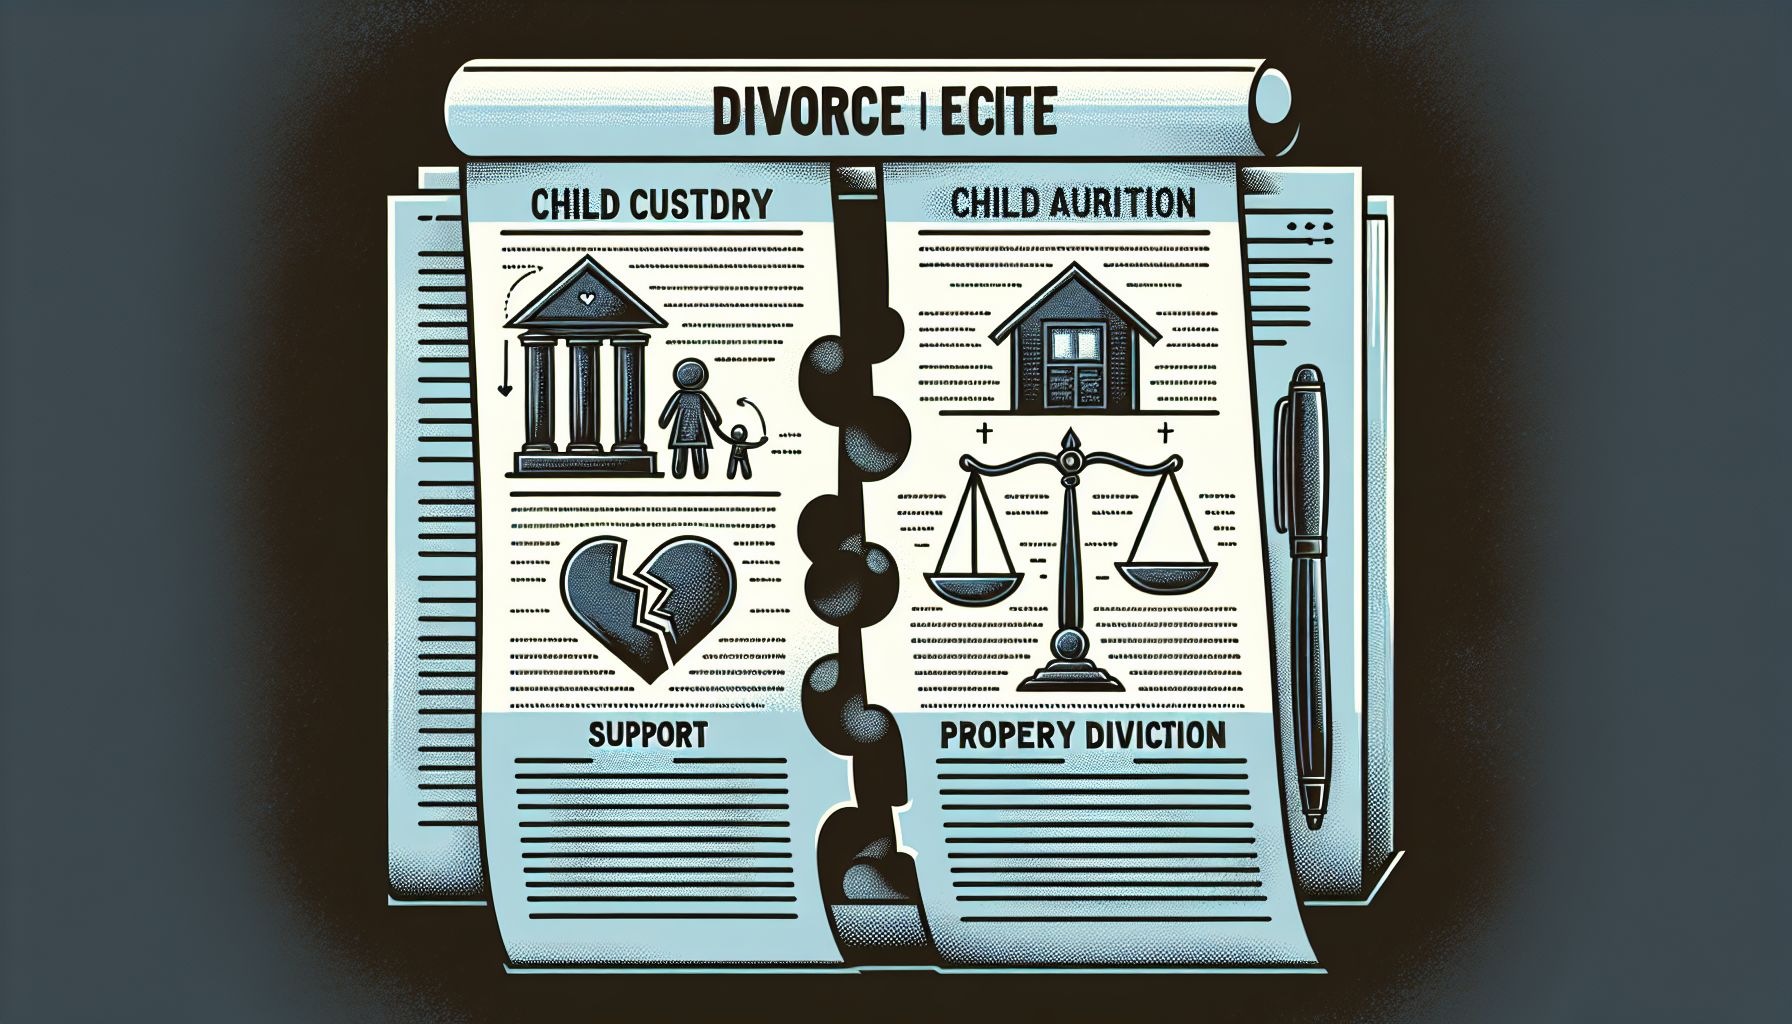 Illustration of child custody and support arrangements in a divorce decree